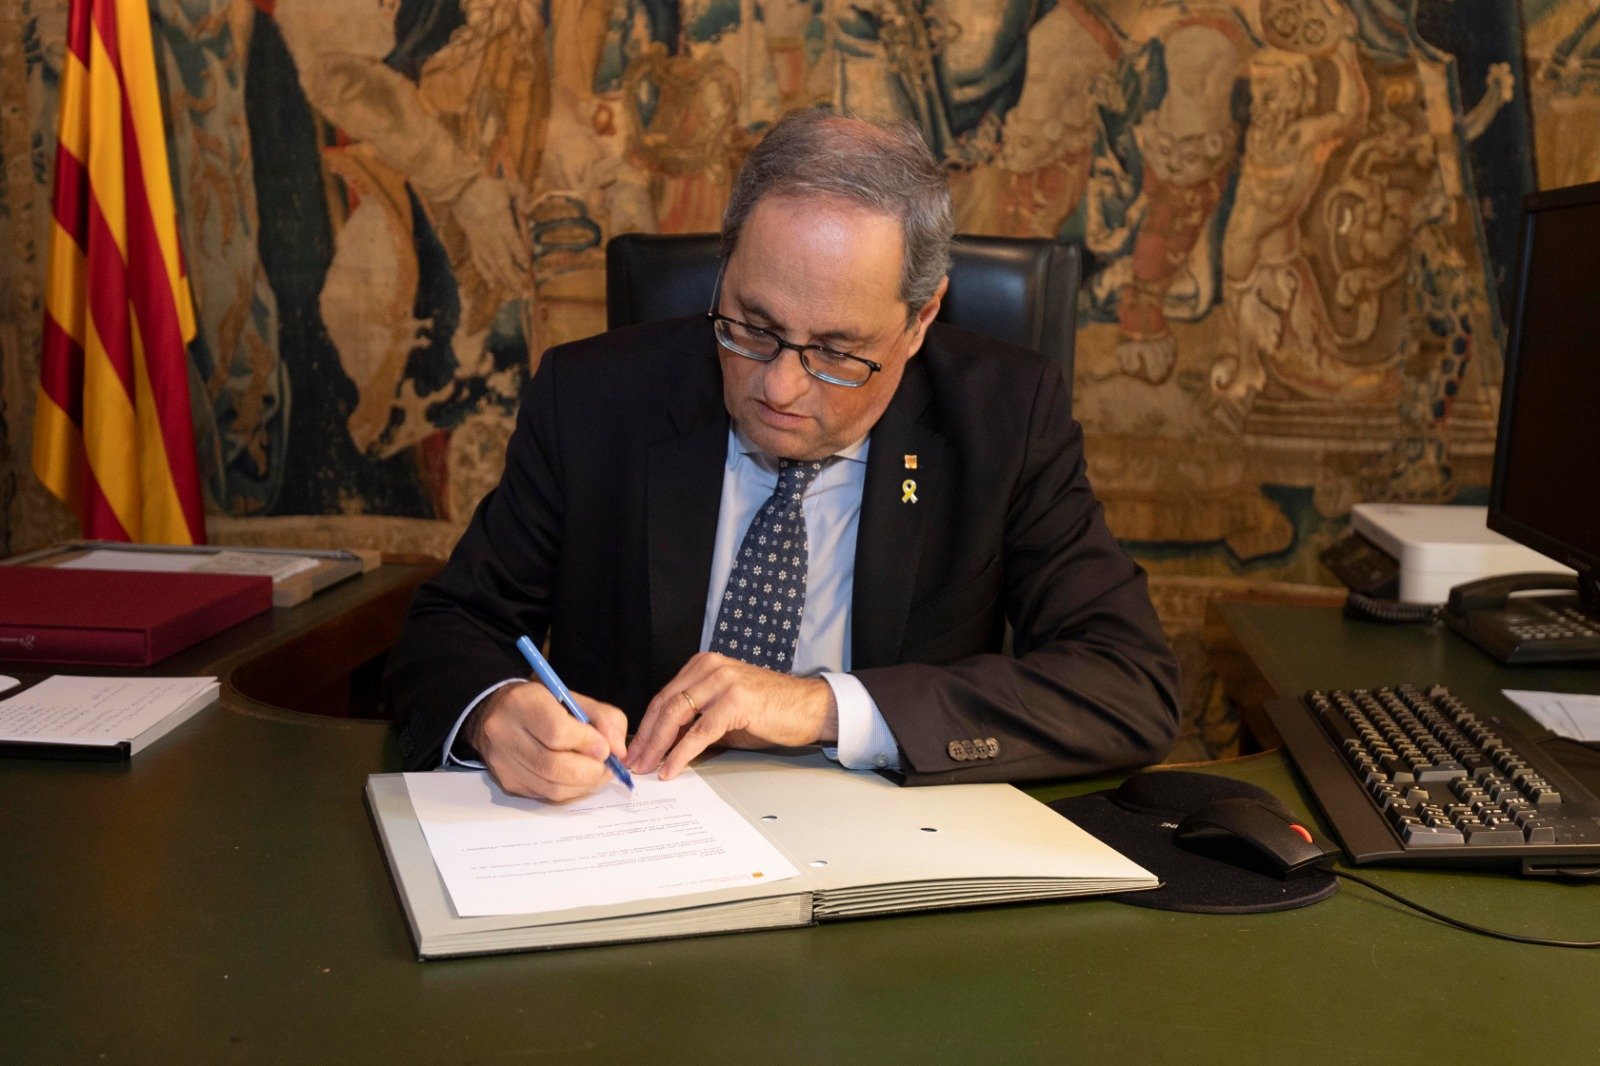 Quim Torra: "The government needed strengthening and new energy"